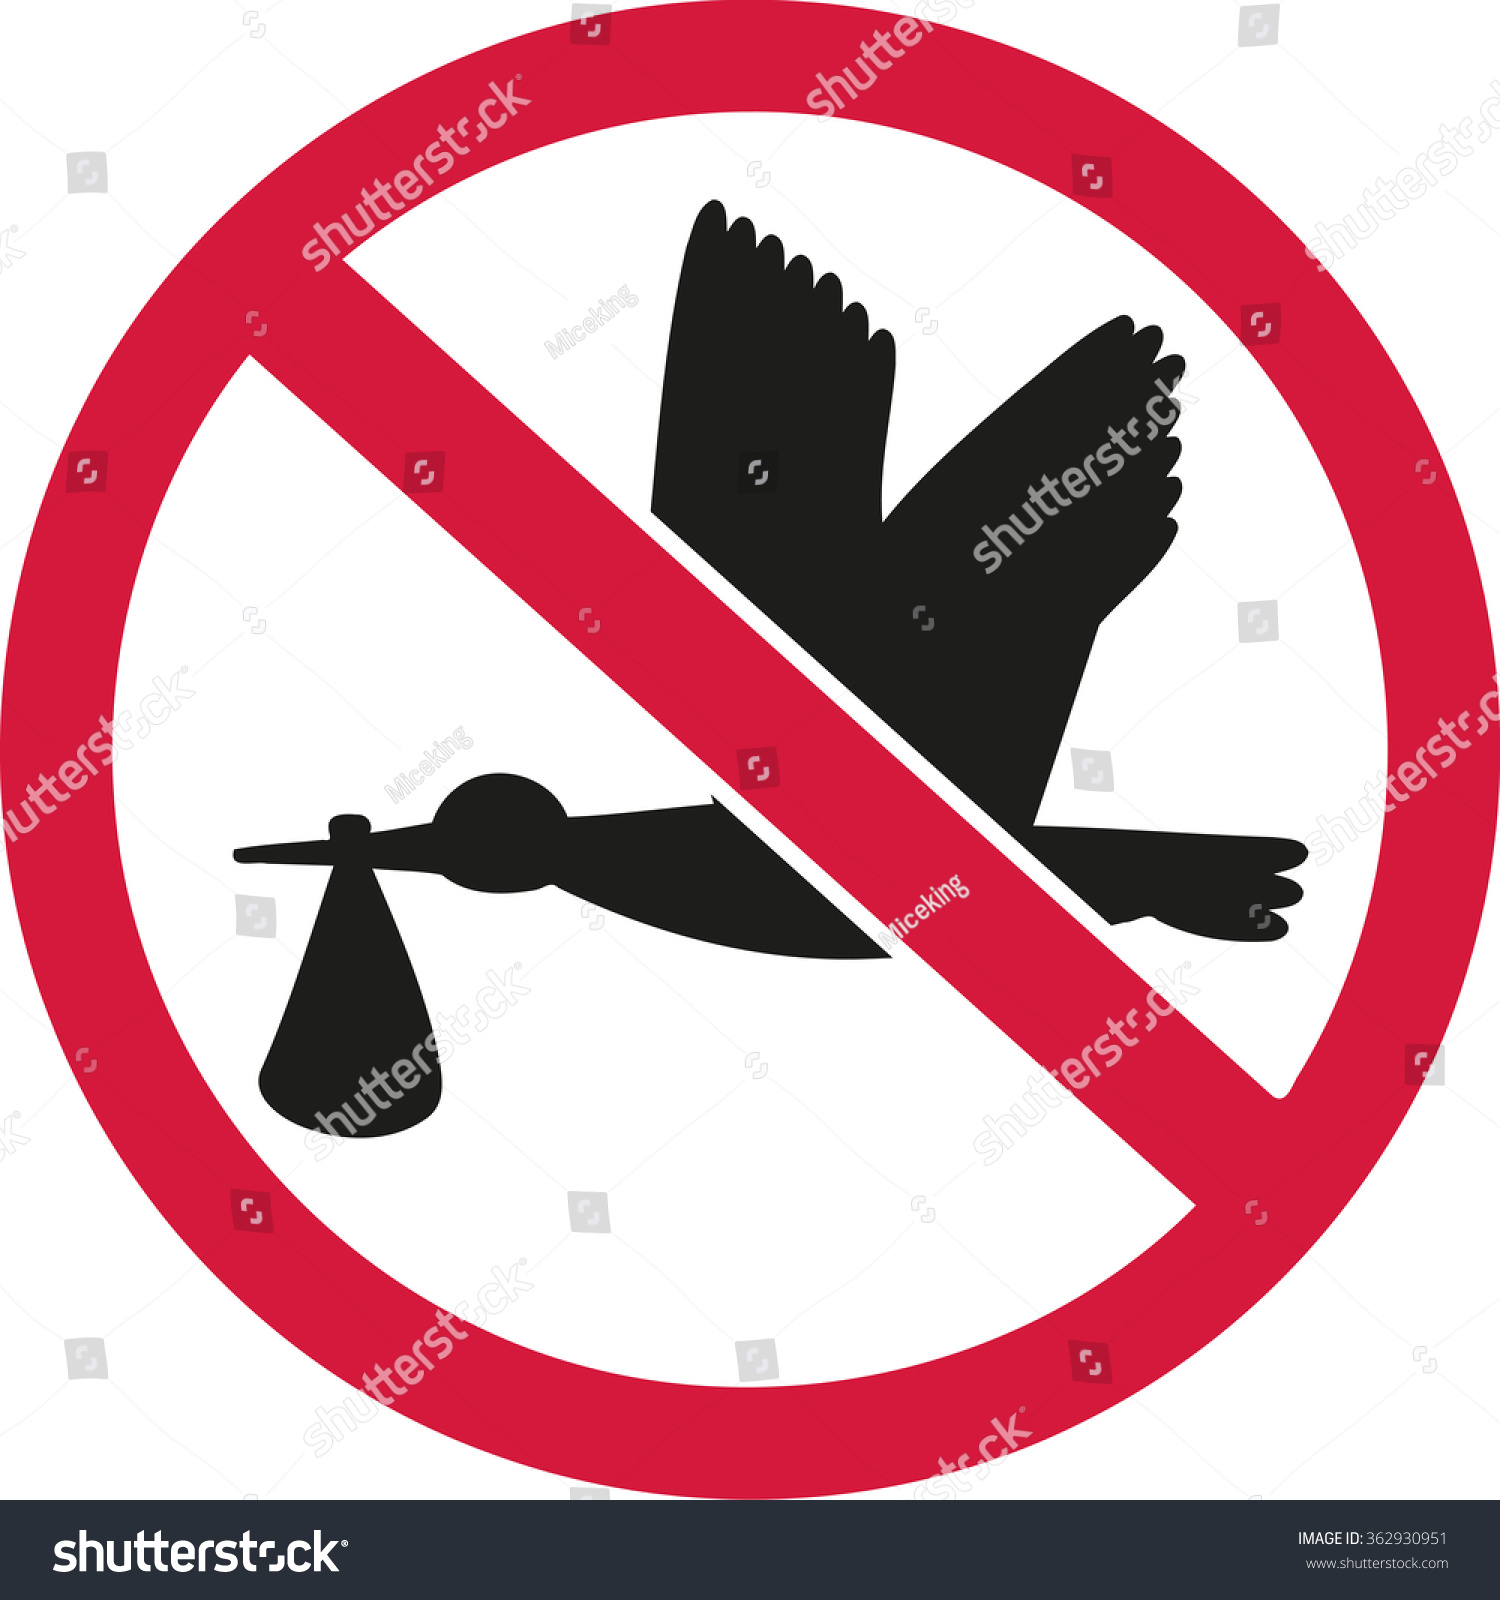 stock-vector-no-baby-please-stork-with-baby-in-a-ban-362930951.jpg